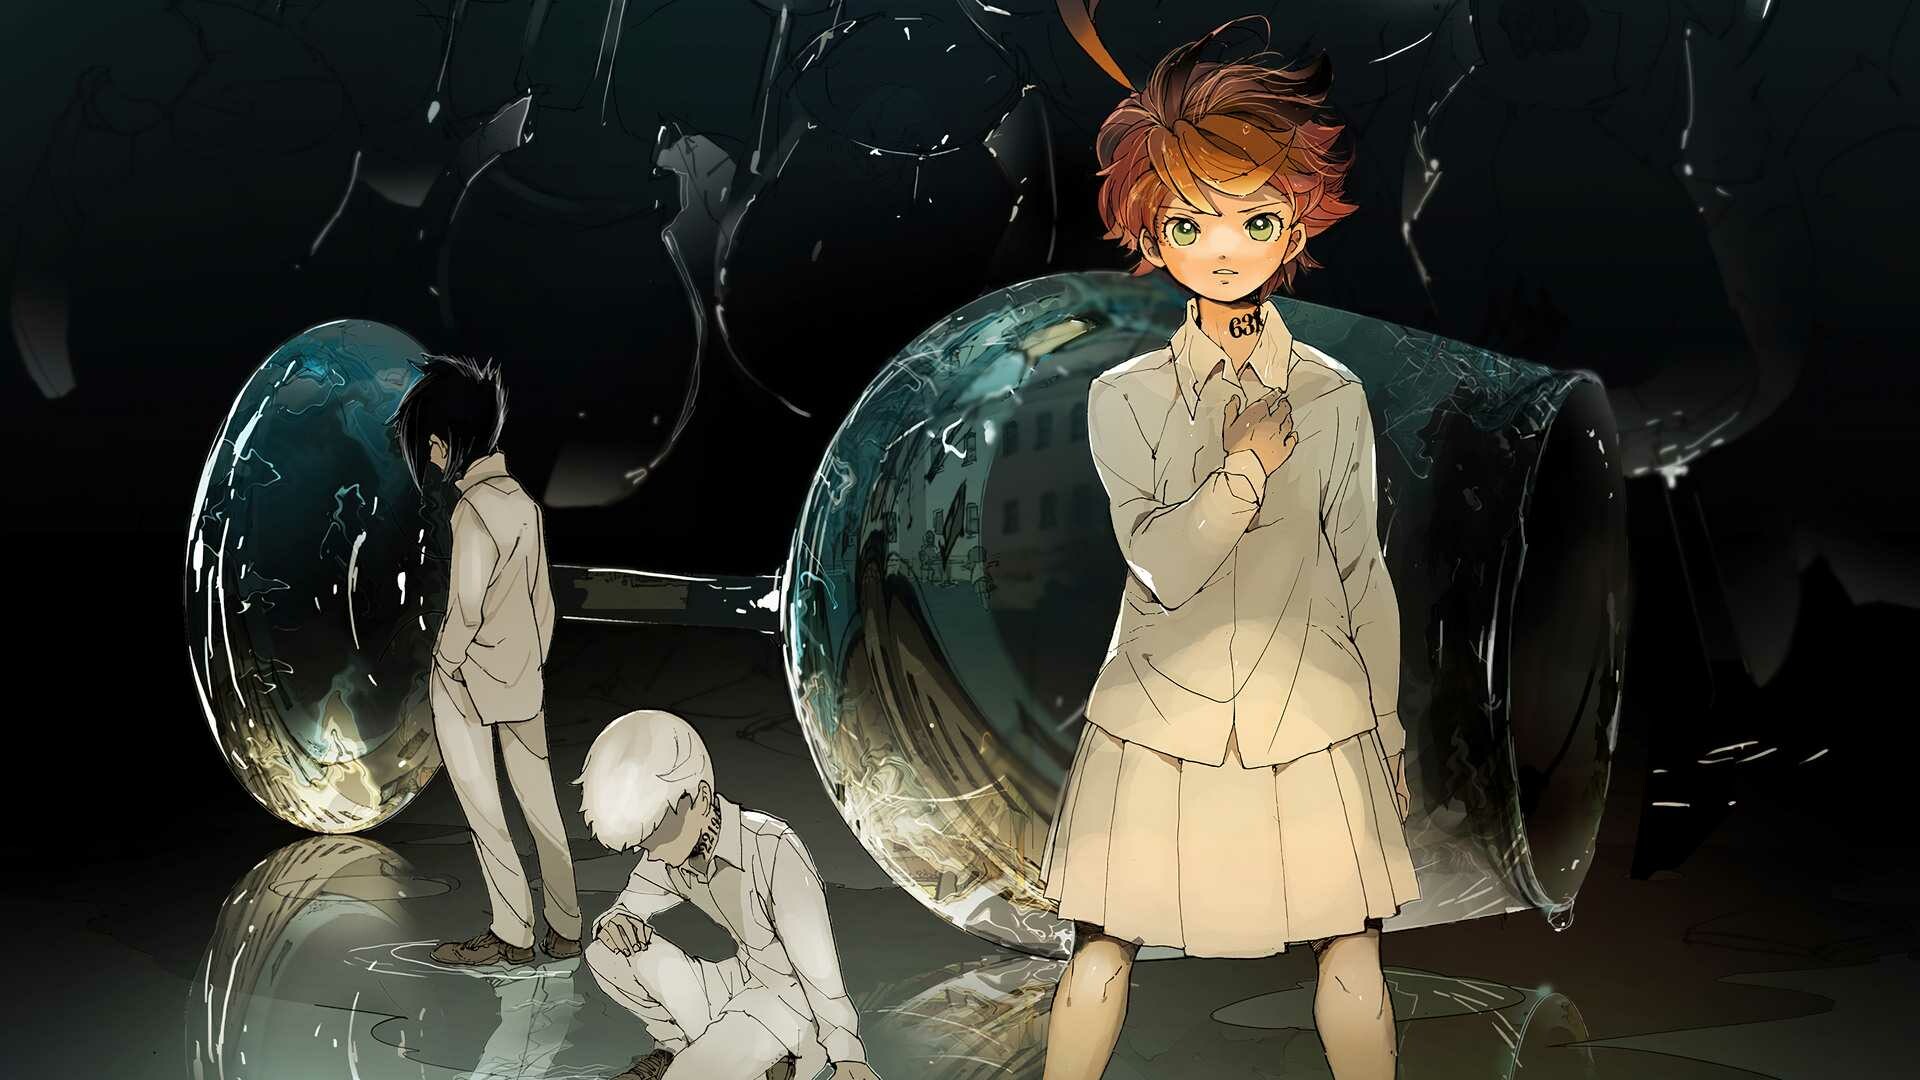 The Promised Neverland: Toonami aired the whole series on October 29, 2022, as part of its Halloween marathon. 1920x1080 Full HD Wallpaper.